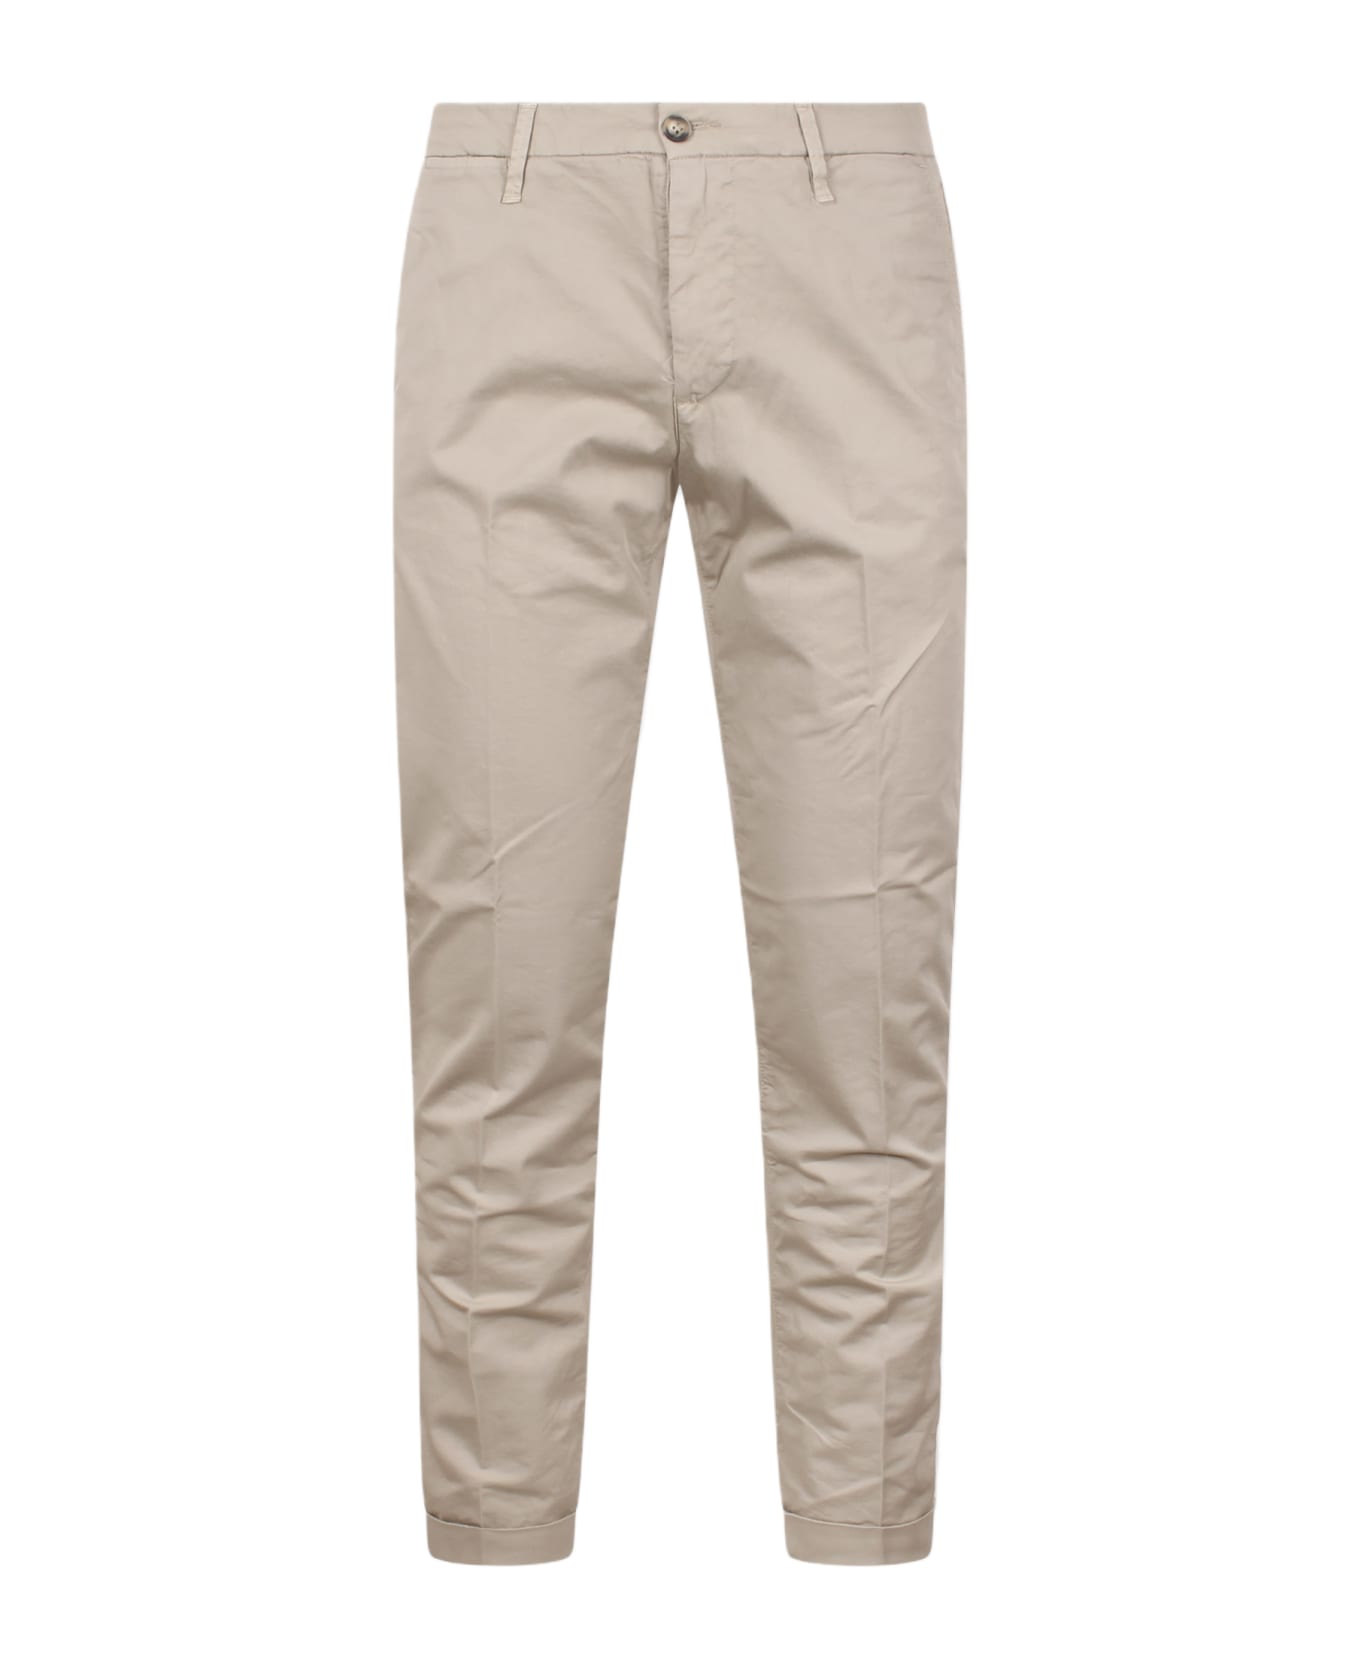 Re-HasH Mucha Chinos Pant - Nude & Neutrals